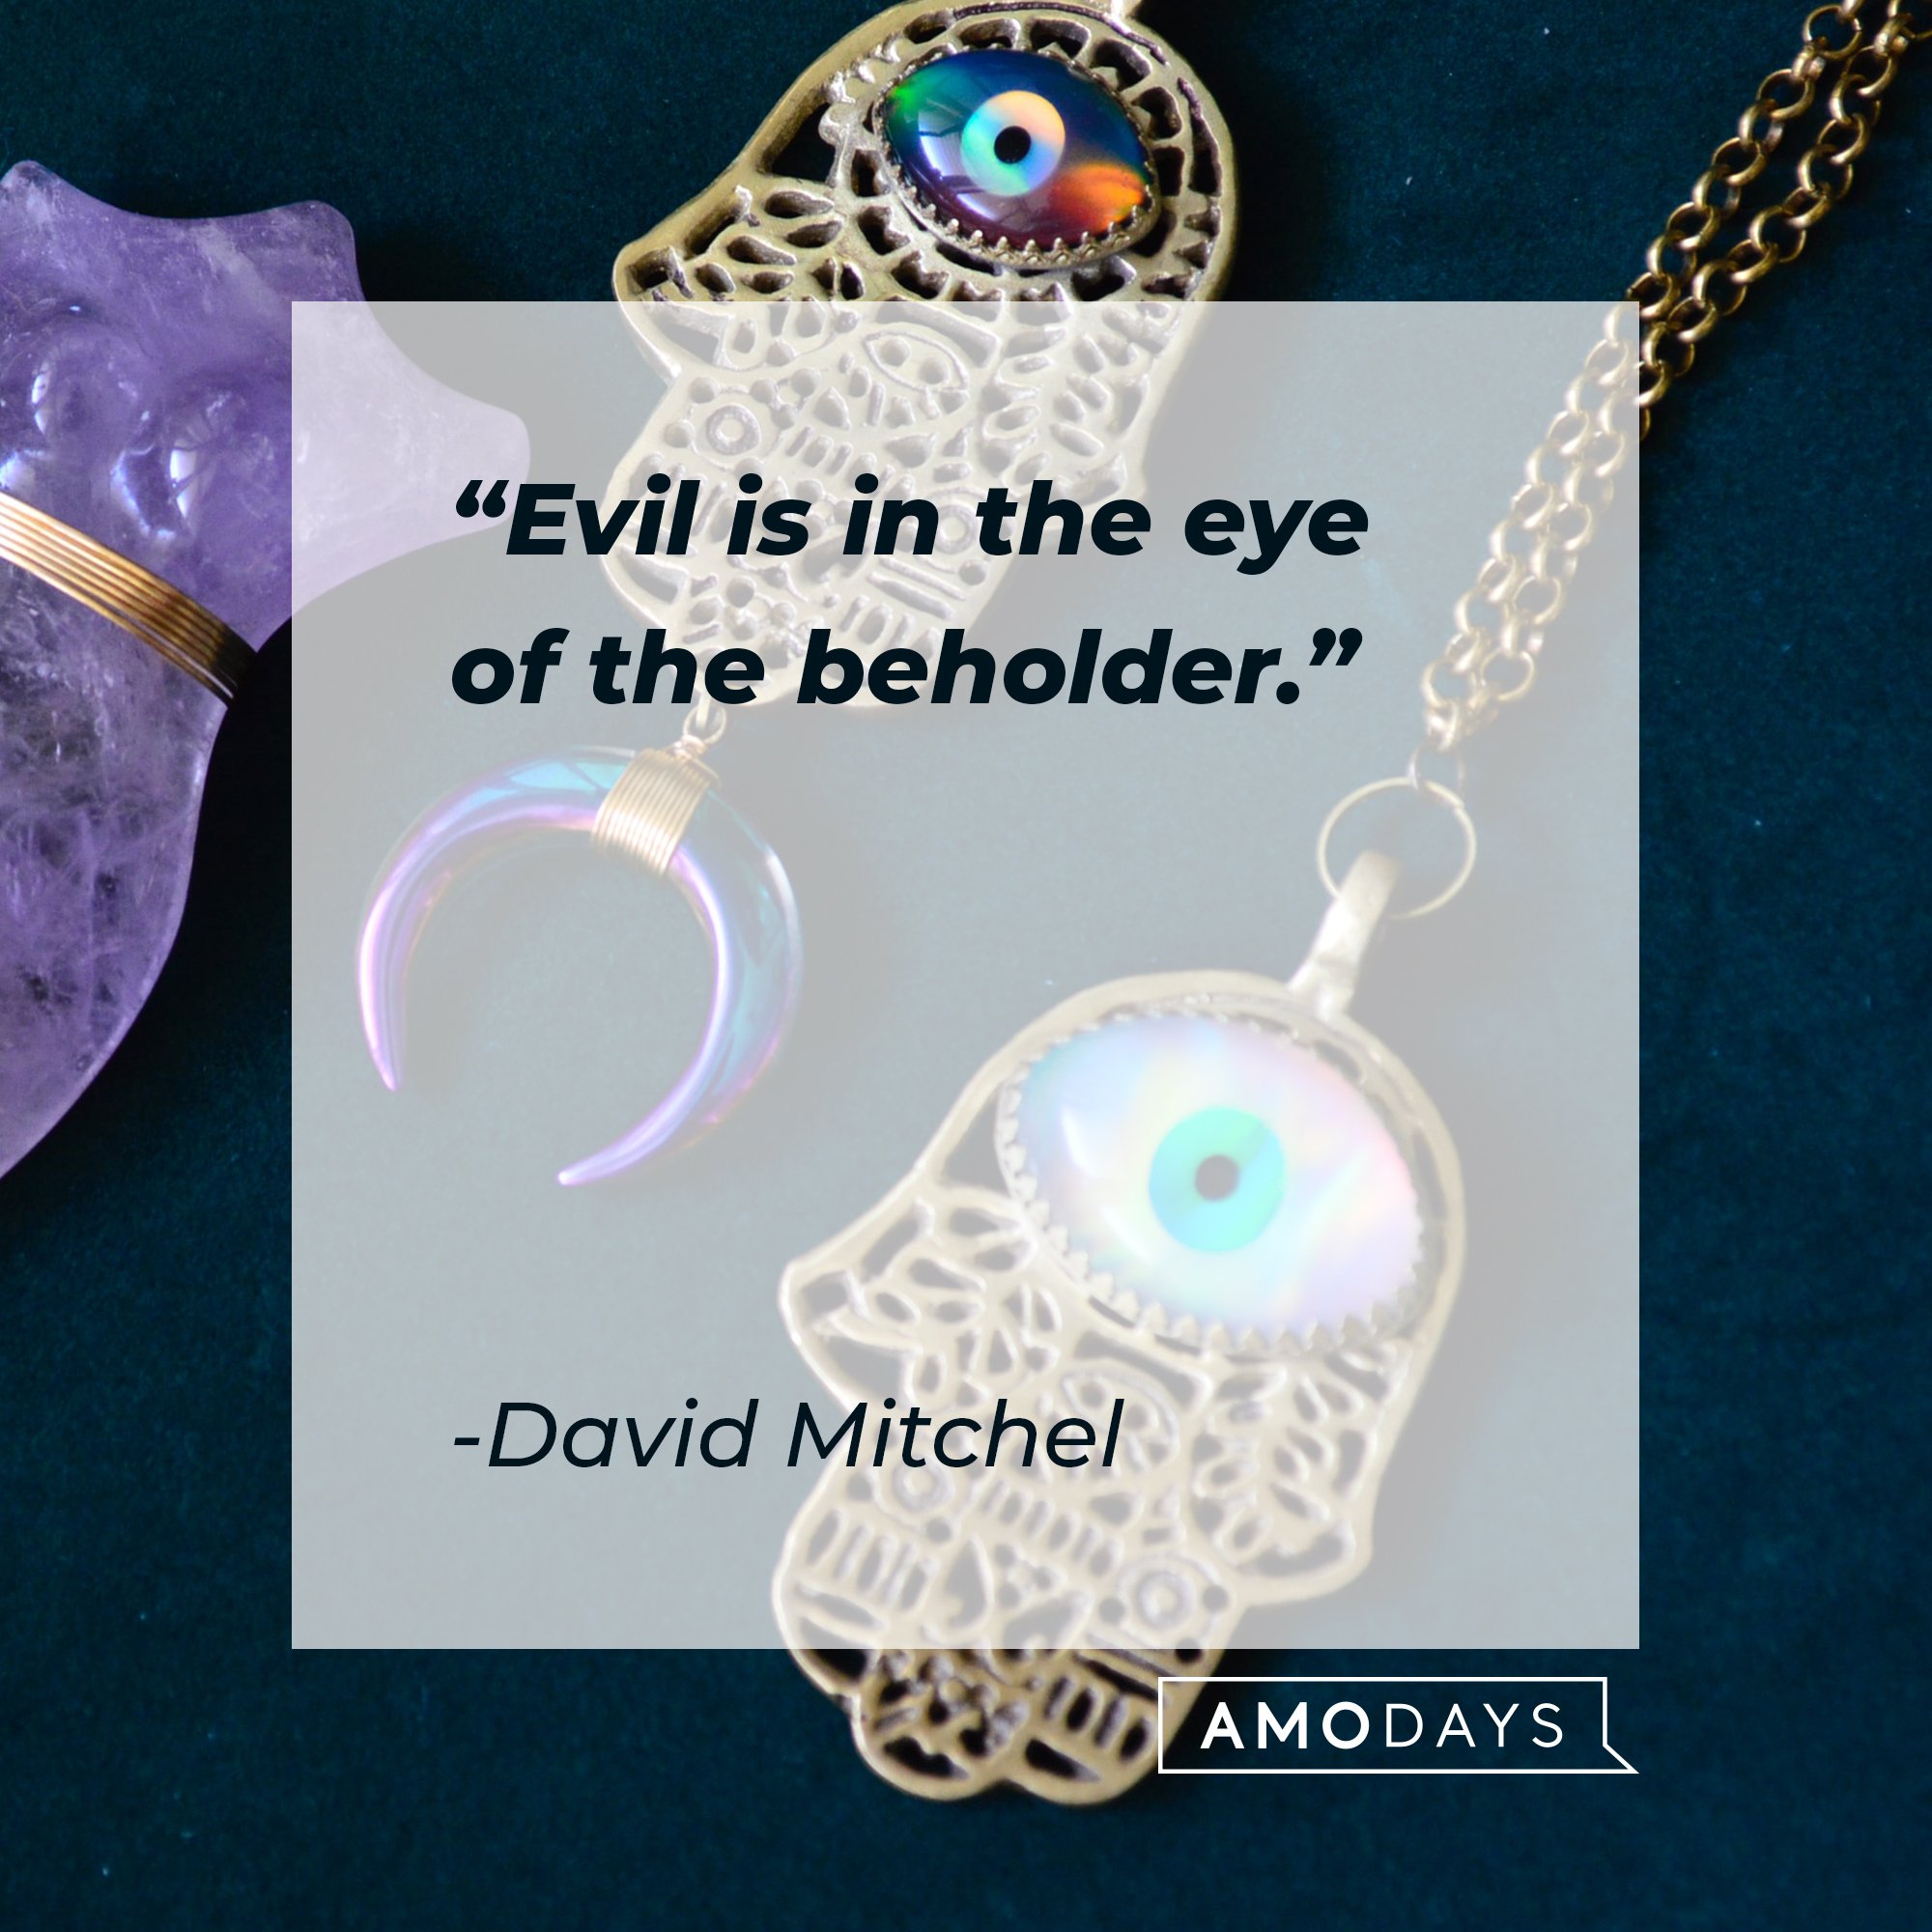 David Mitchell’s quote: "Evil is in the eye of the beholder." | Image: AmoDays